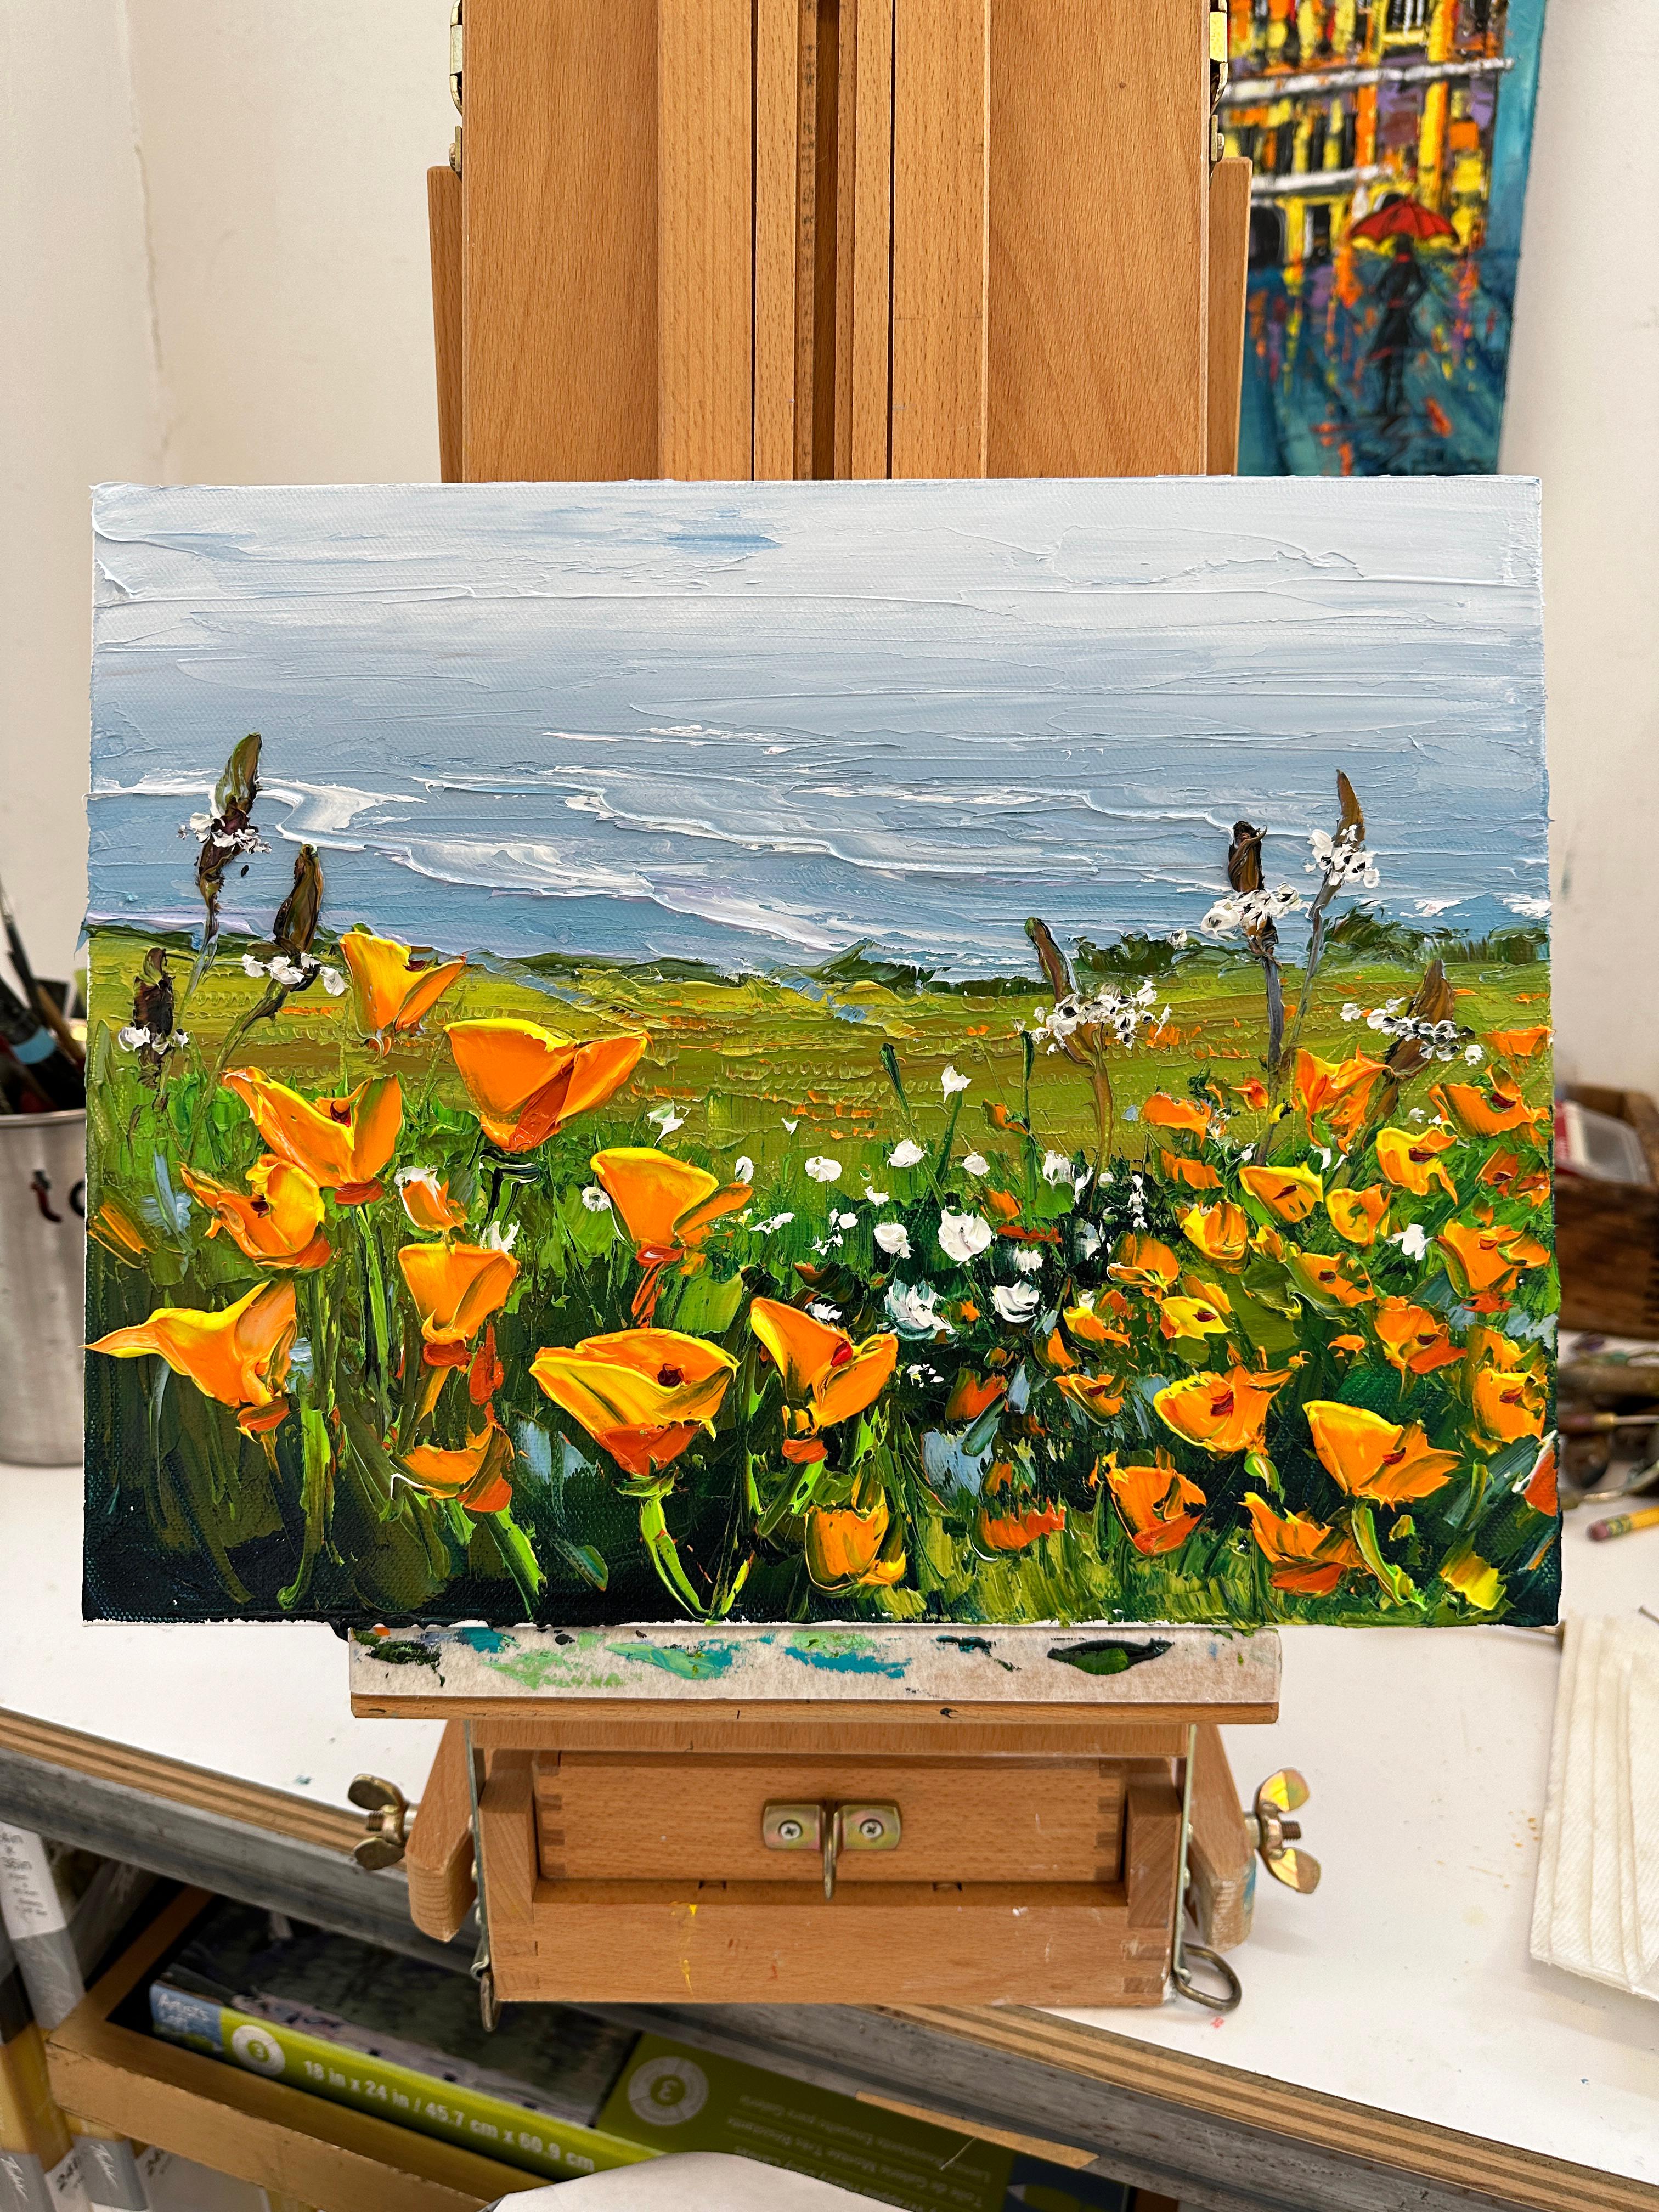 <p>Artist Comments<br>Artist Lisa Elley depicts a stunning view of California's coastal wildflowers in full bloom. She paints a stunning impressionist scene with vibrant poppies adorning the field. With bold palette knife strokes and skillful use of